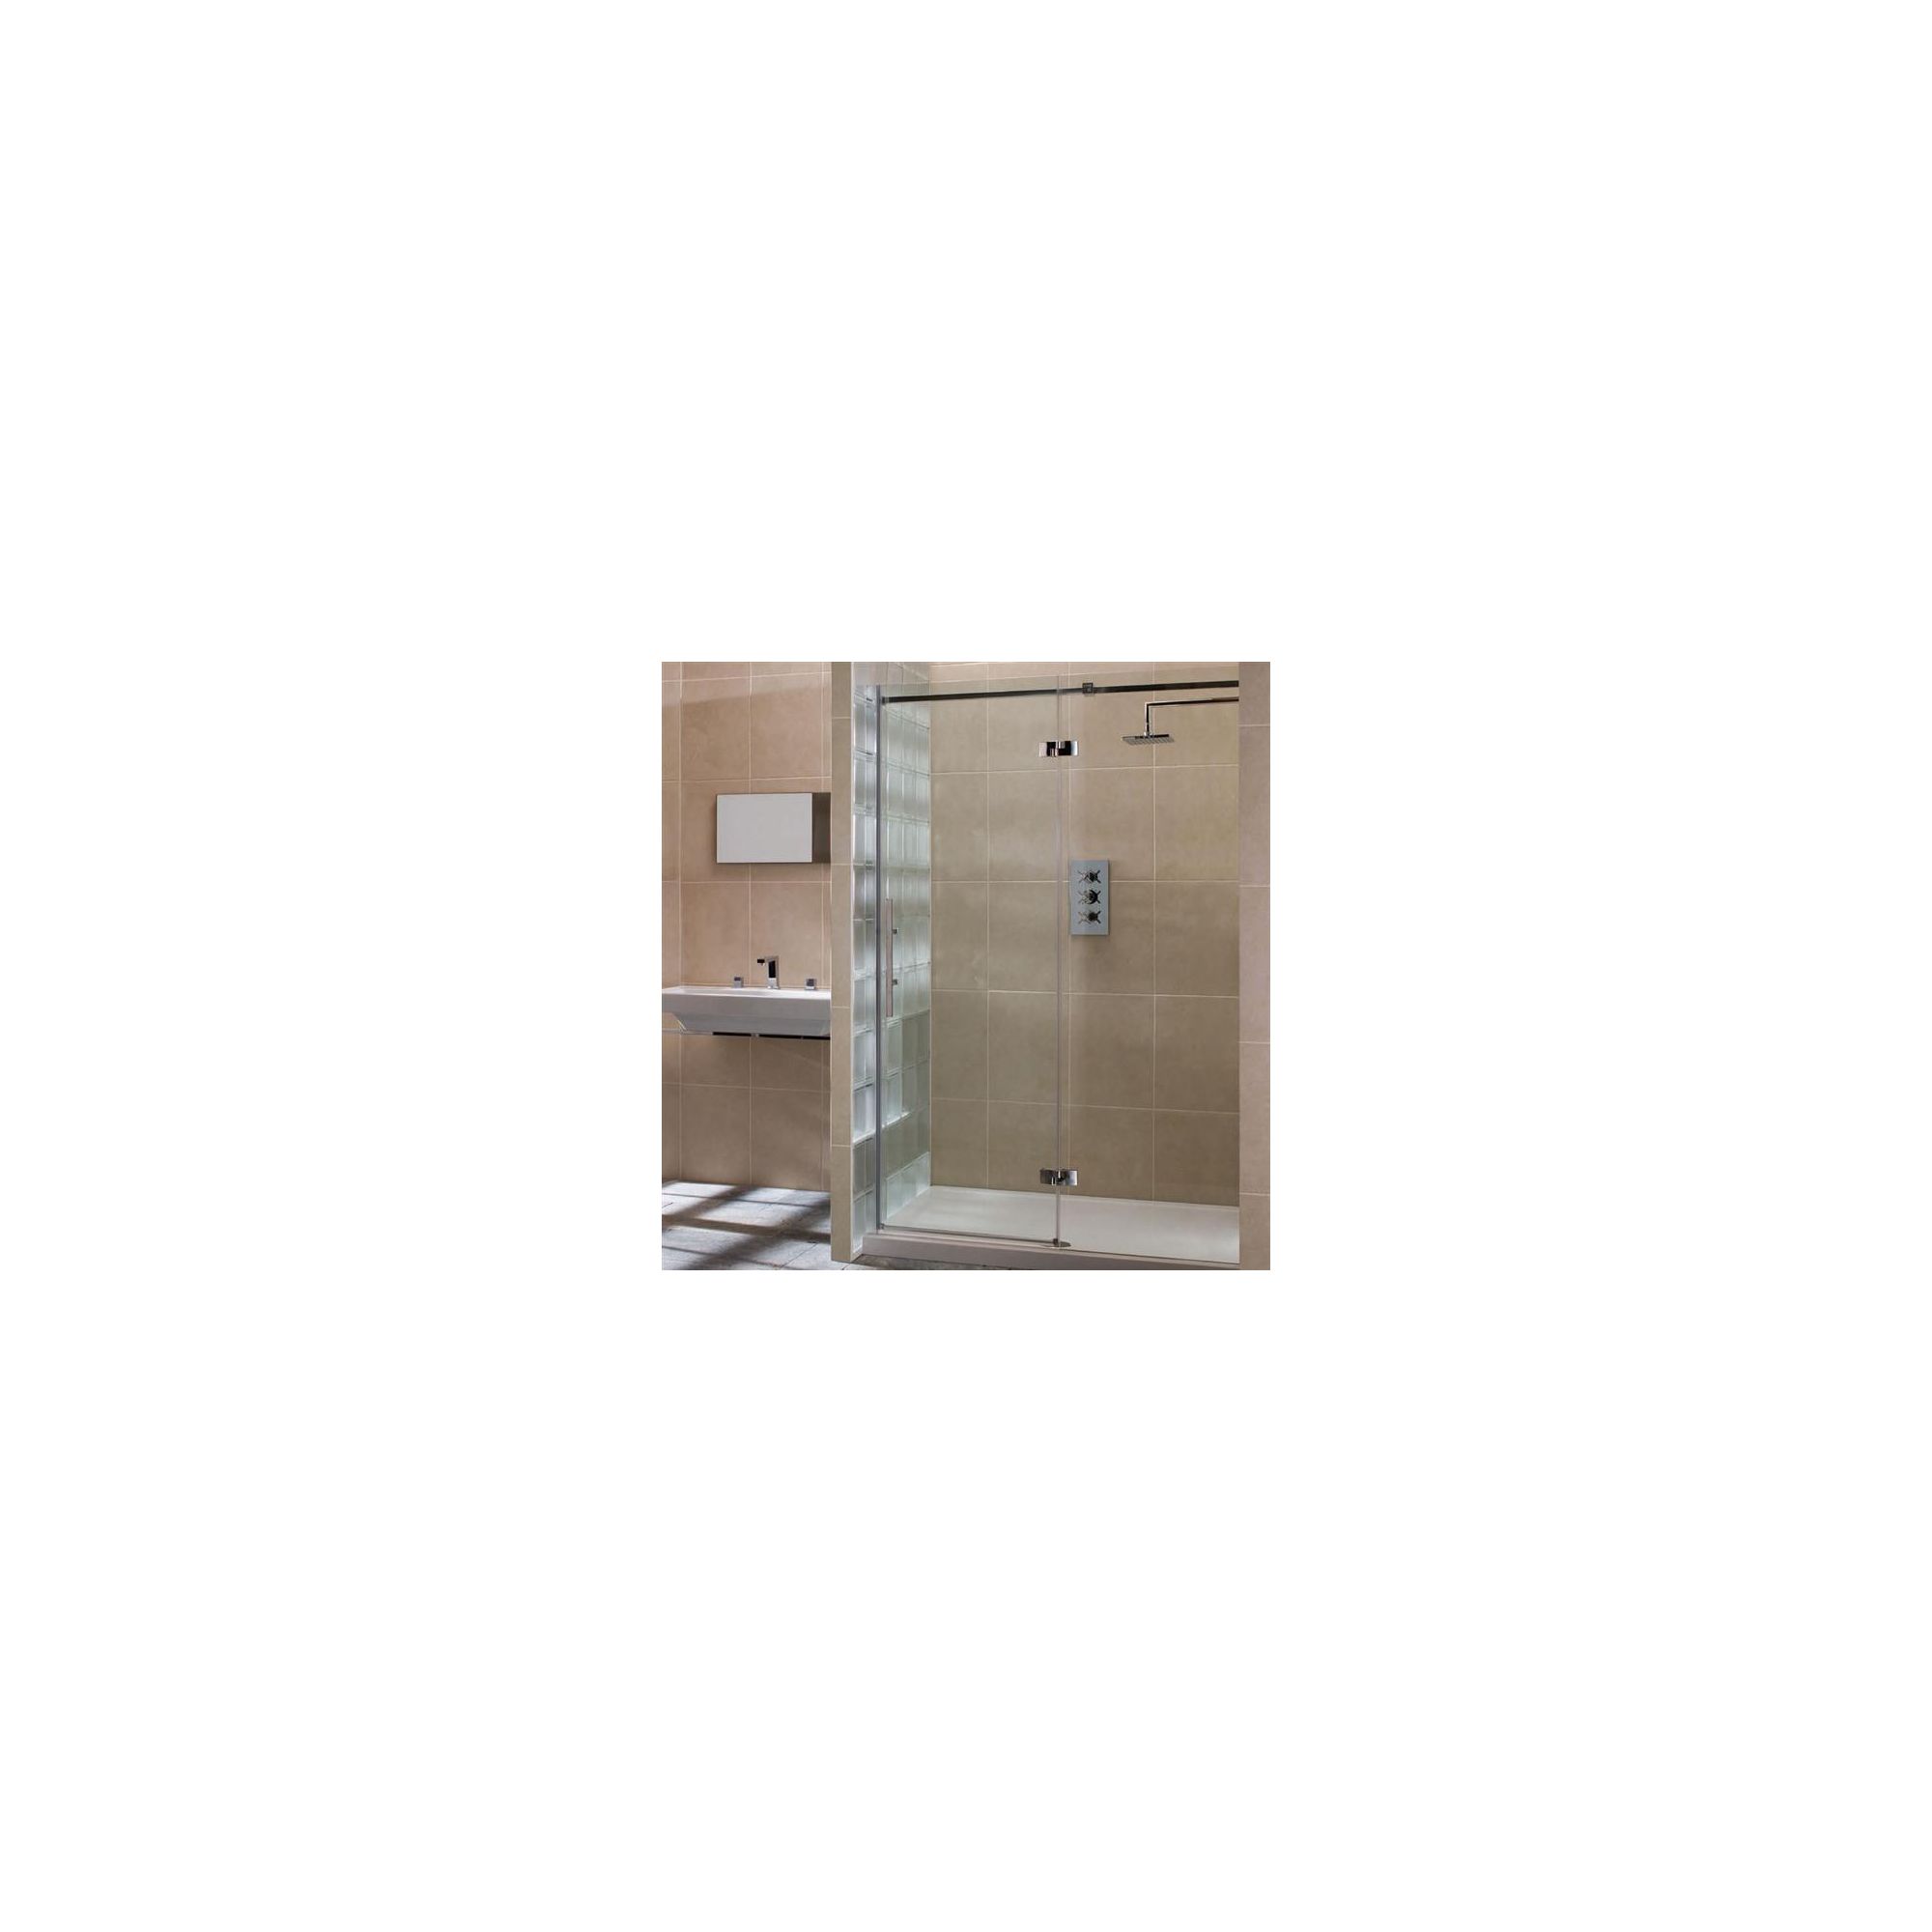 Merlyn Vivid Nine Hinged Door Alcove Shower Enclosure with Inline Panel, 1700mm x 800mm, Right Handed, Low Profile Tray, 8mm Glass at Tesco Direct